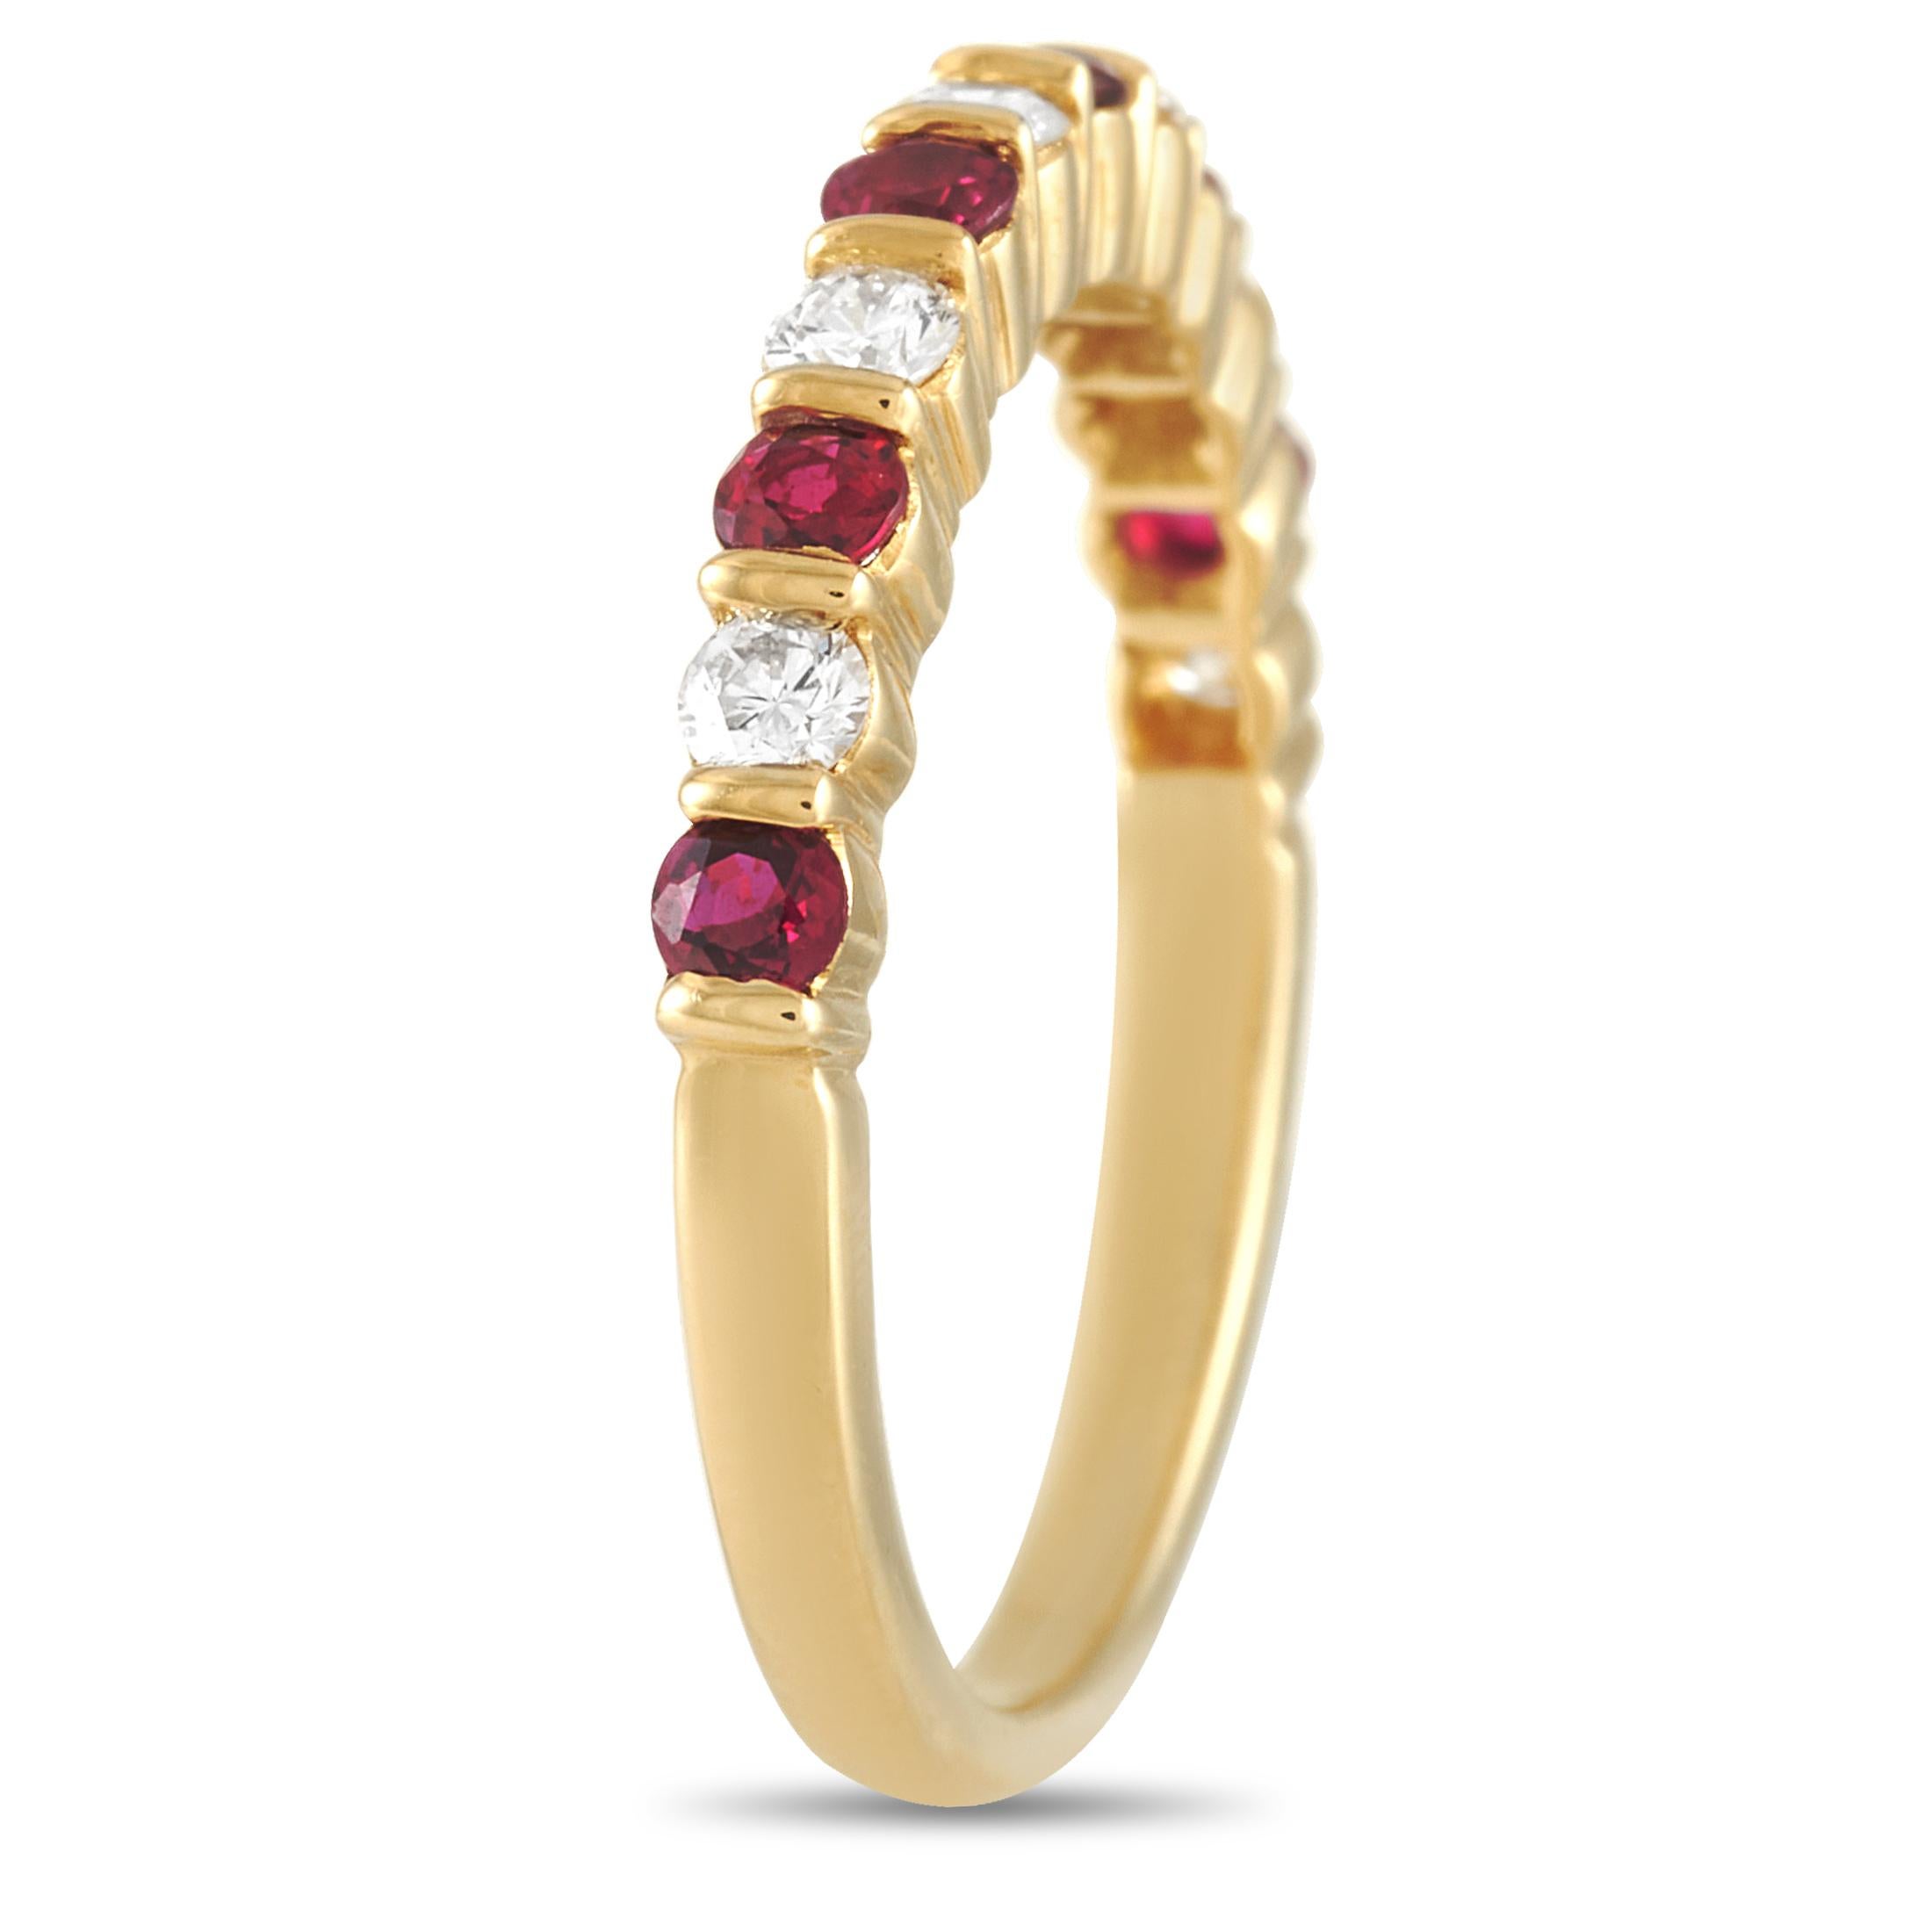 This Tiffany & Co. 18K Yellow Gold 0.20 ct Diamond and 0.20 ct Ruby Ring is designed with a bar channel of alternating rubies and diamonds. The band is just 2mm thin and has 2mm by 20mm top dimension. A ring as simple yet striking as this is one